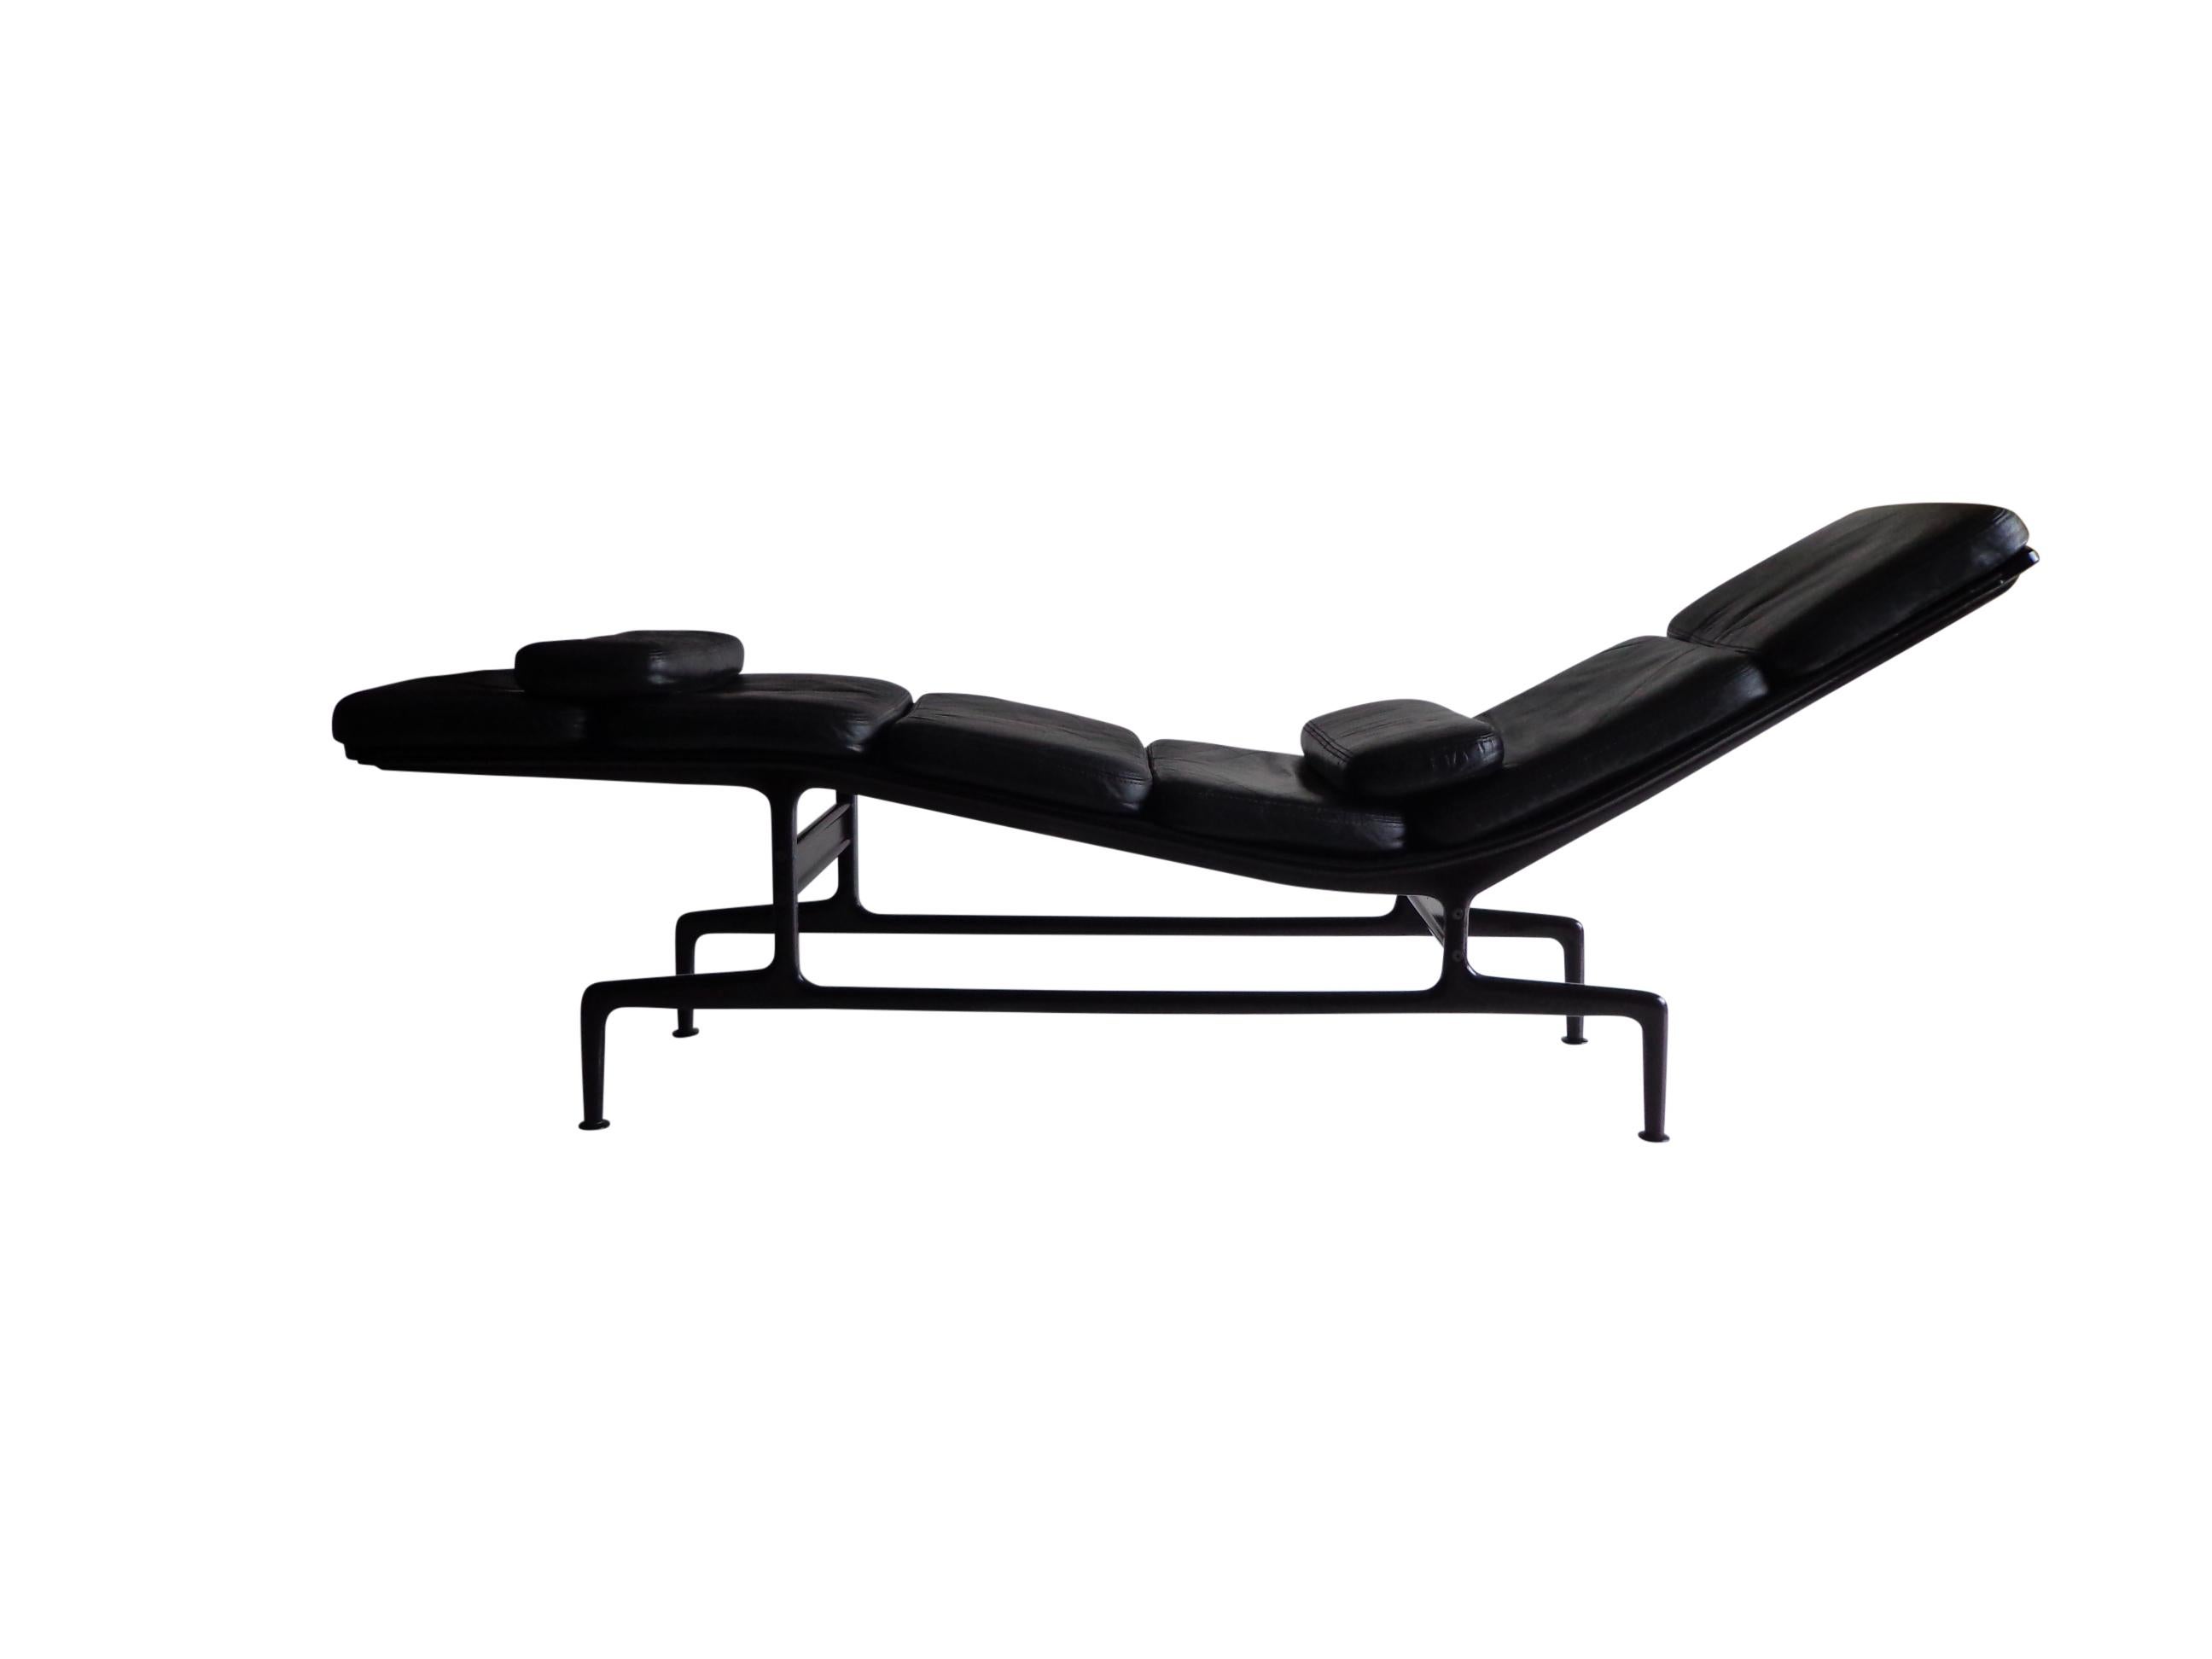 A handsome example of the Billy Wilder chaise lounge by Ray and Charles Eames for Herman Miller. In softpad and high-quality black leather on a eggplant color base. Six cushions connected by zippers are attached to the aluminum frame. Comes with